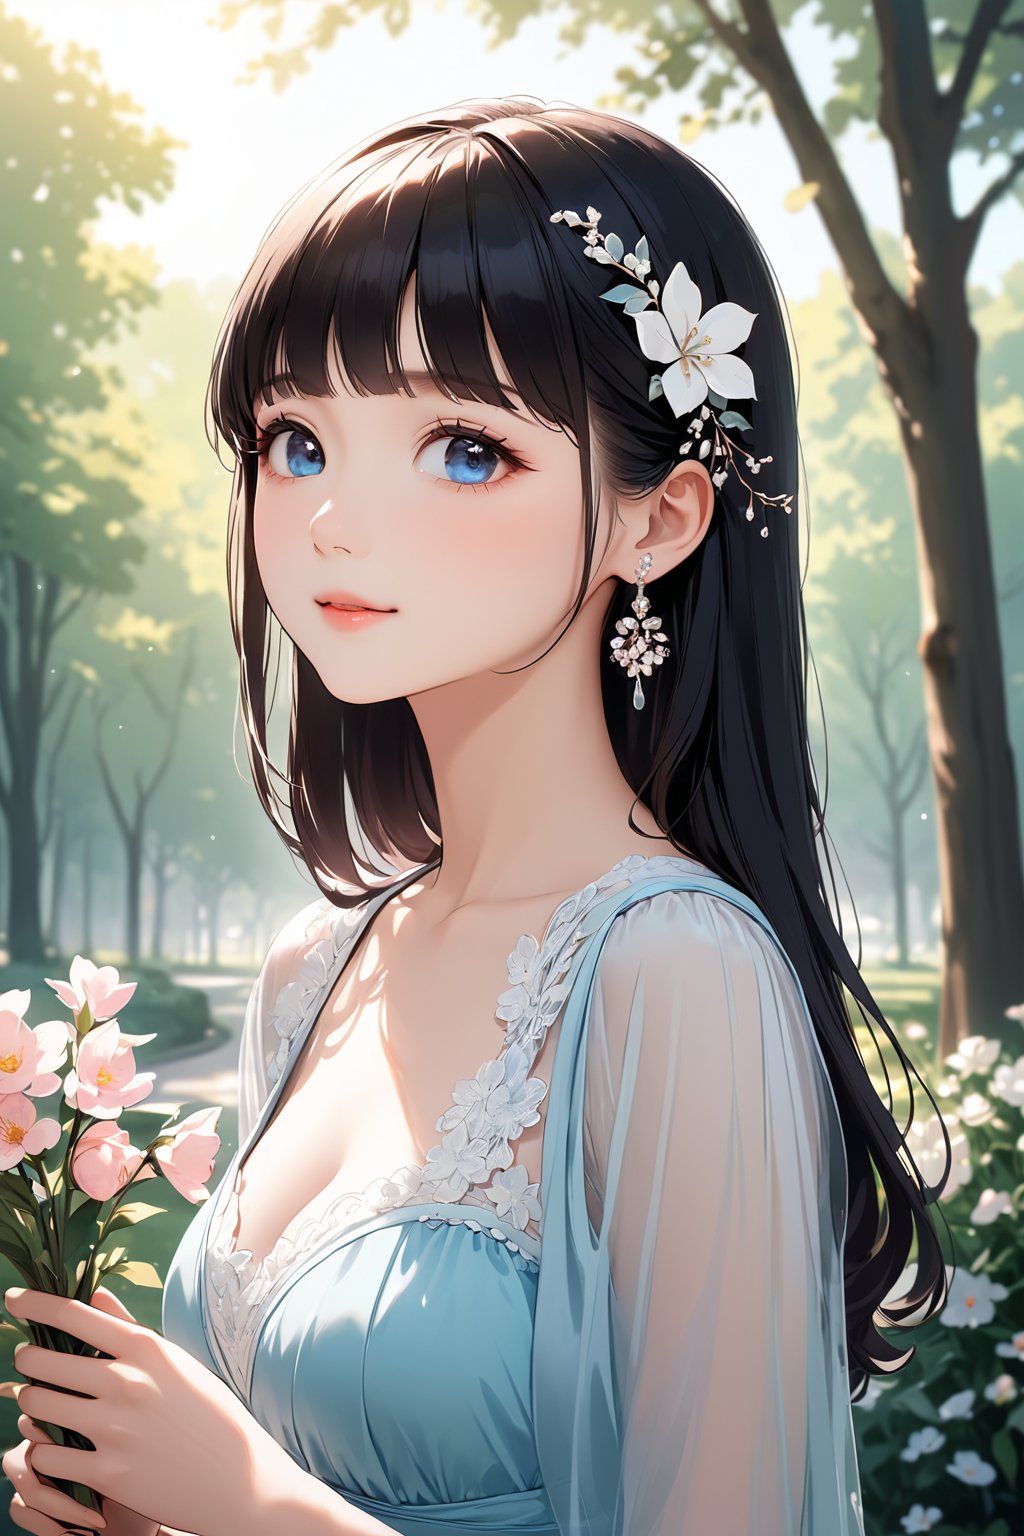 (8k, best quality, (look up:1.2), (masterpiece:1.2), ultra high resolution, high contrast, super detailed, professional Lighting, lively atmosphere, Under the bright spring sunshine, sunlight through the trees in a park, beautiful spring flowers, elegant ,  gentle, 1girl, blue eyes, styled black hair, bangs, flower earrings, blue of shoulder dress, hair ornaments, holding, cute appearance, young girl, doe eyes, gentle, happy。Her beautiful face, perfect figure, lovely figure,  peaceful , shine, calm atmosphere.